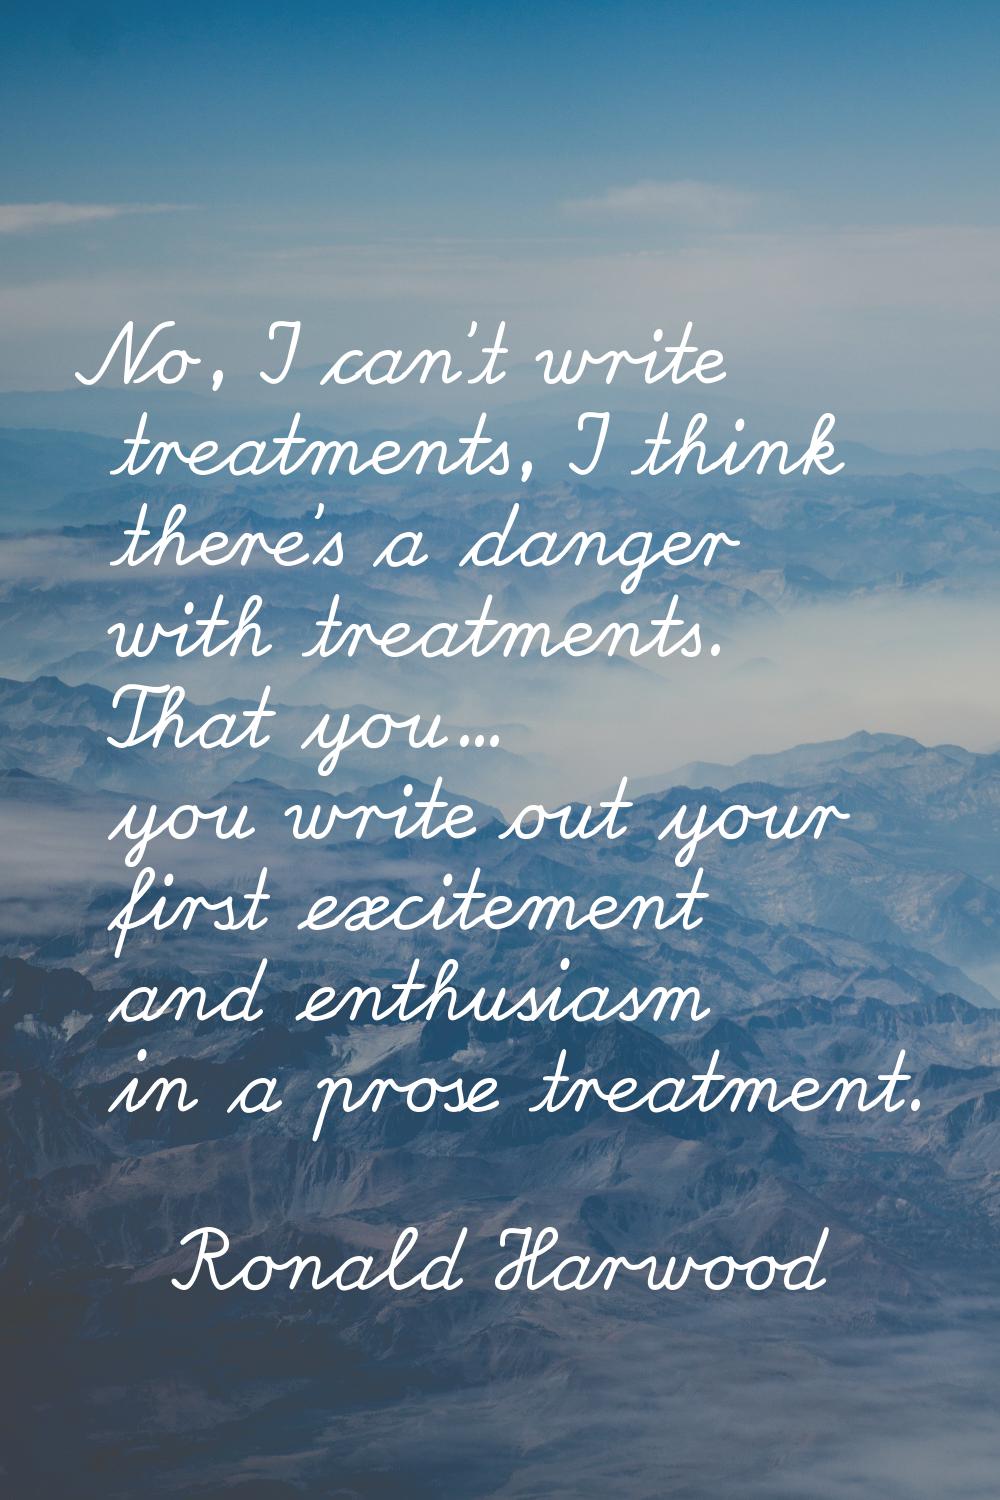 No, I can't write treatments, I think there's a danger with treatments. That you... you write out y